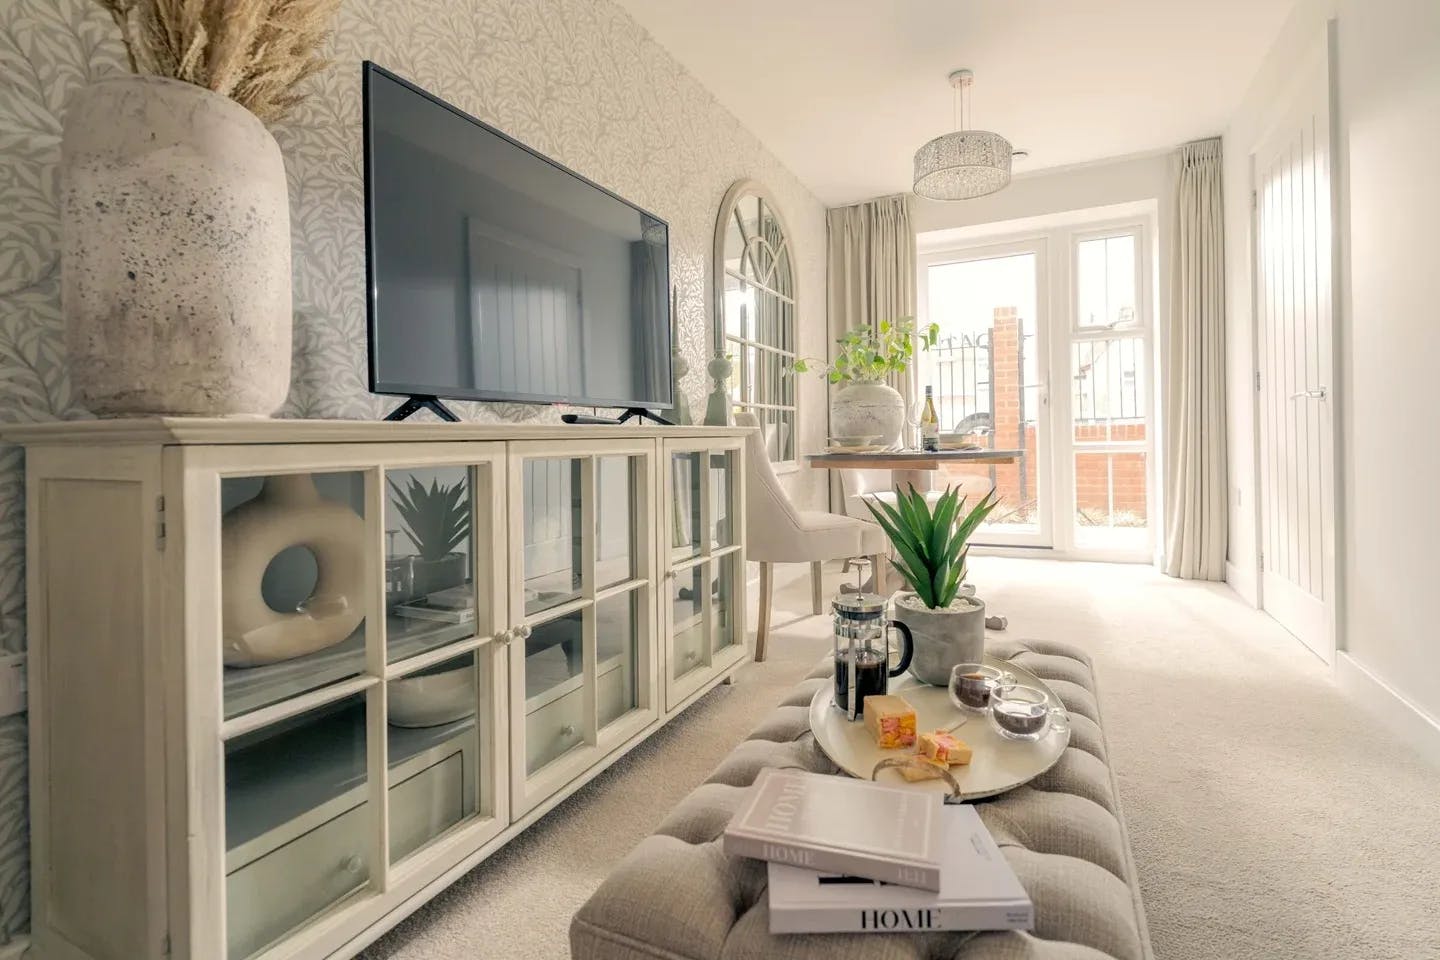 Living Room at Priory Place Retirement Apartment in Stratford-upon-Avon, Warwickshire